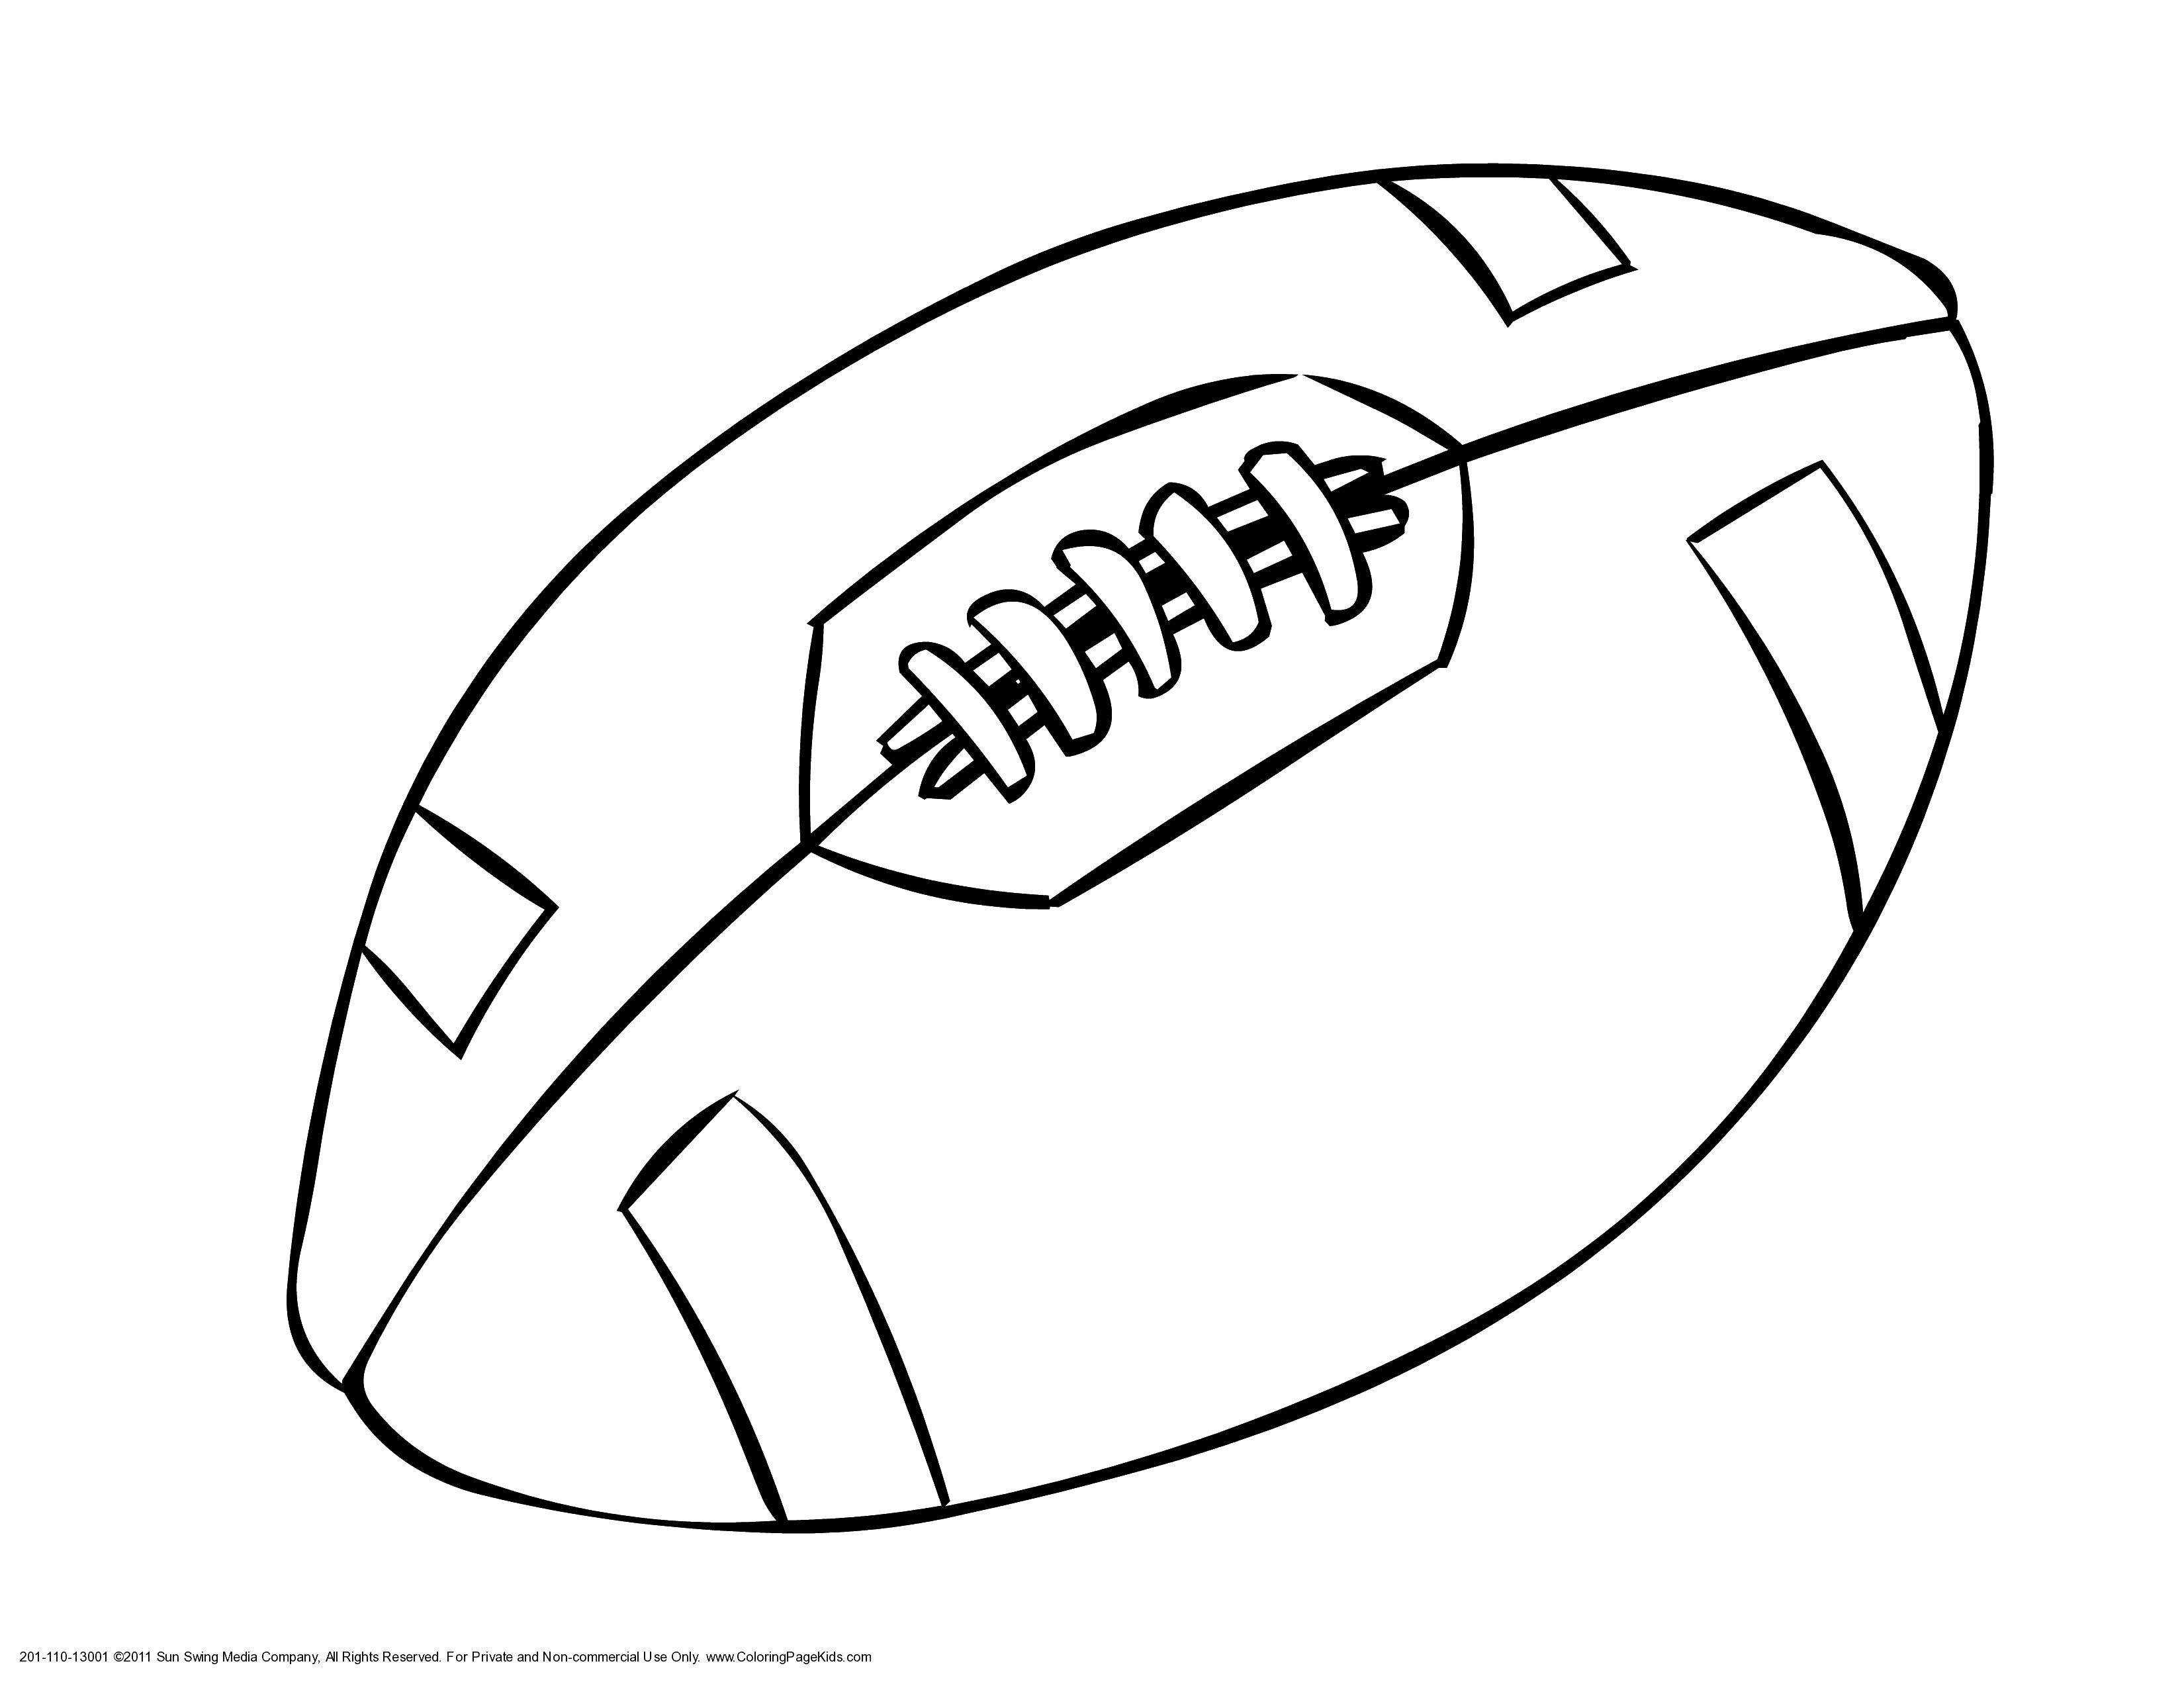 Coloring Rugby ball. Category games. Tags:  game, Rugby, ball.